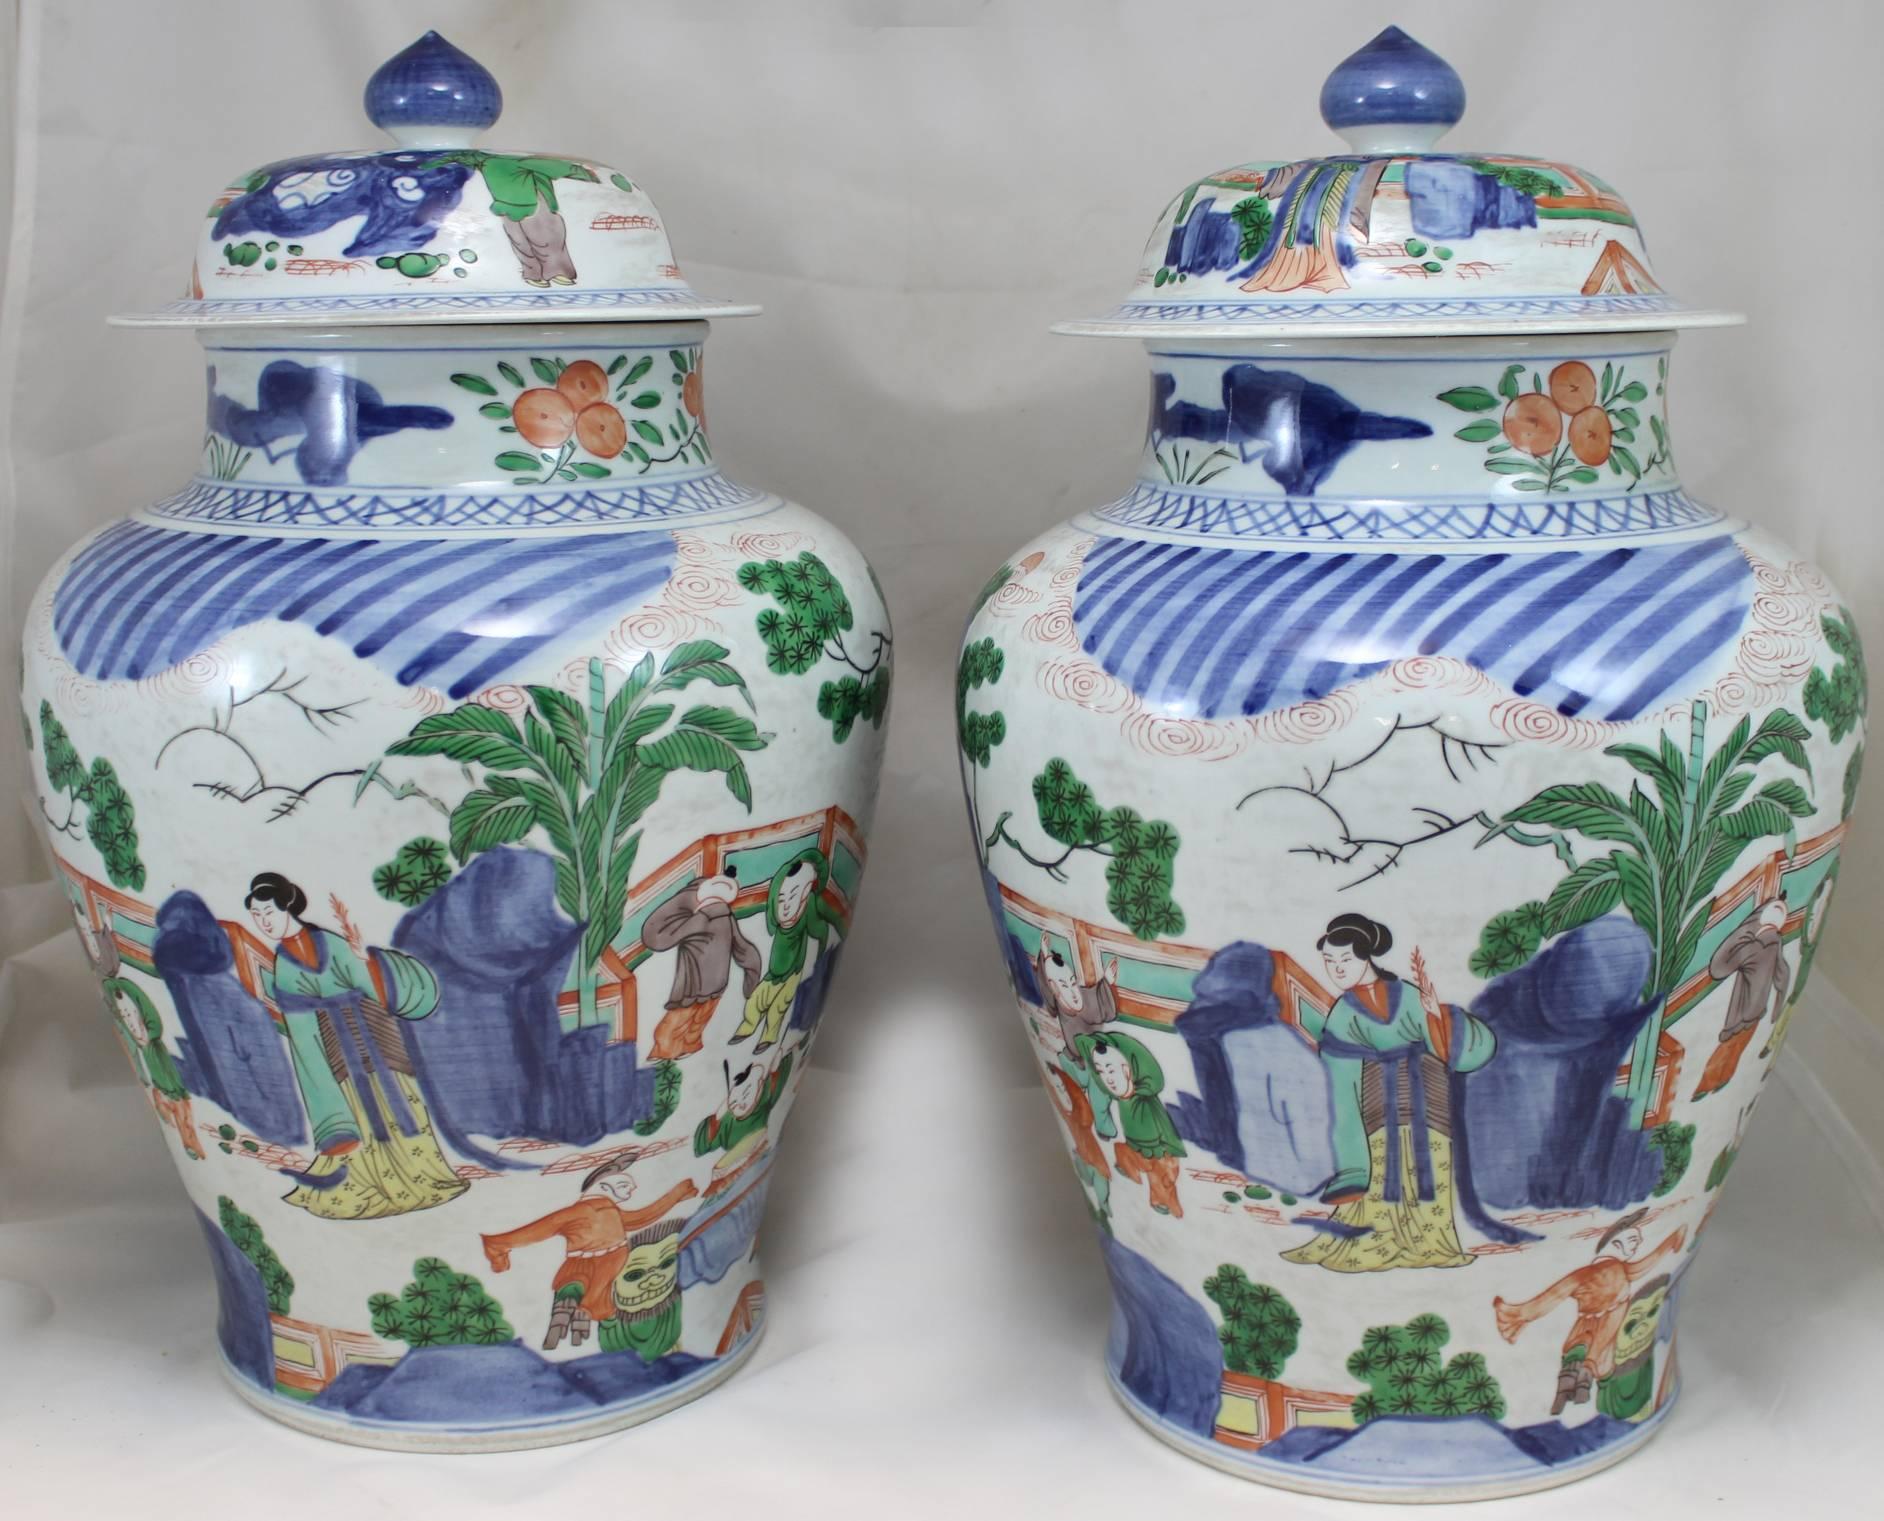 A fine pair of Chinese Qing Dynasty polychrome covered porcelain jars with overall scenes of children at play with mothers looking on, probably dating to the late 19th century.